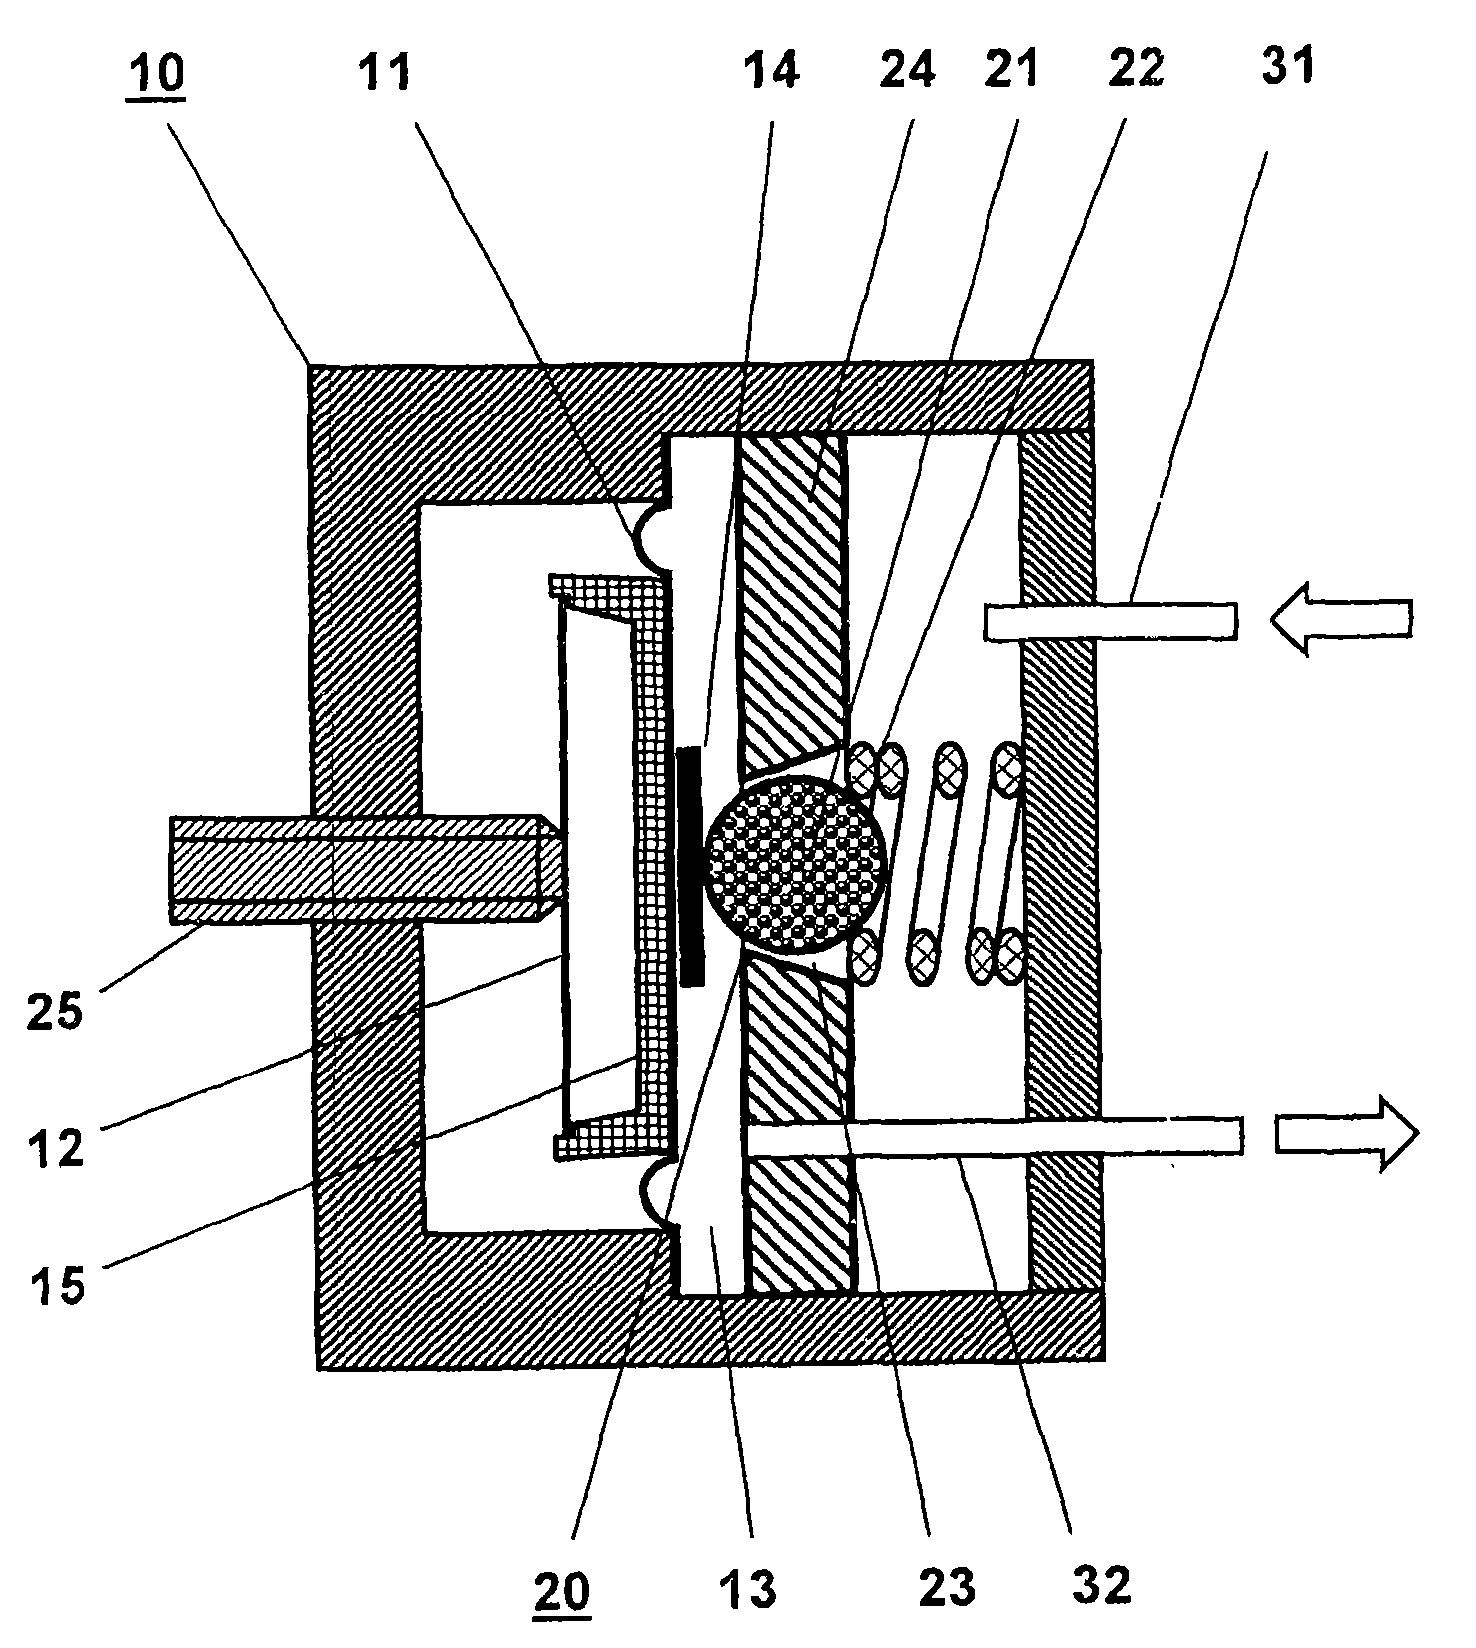 Electropneumatic transducer with a pneumatic pressure-regulating valve